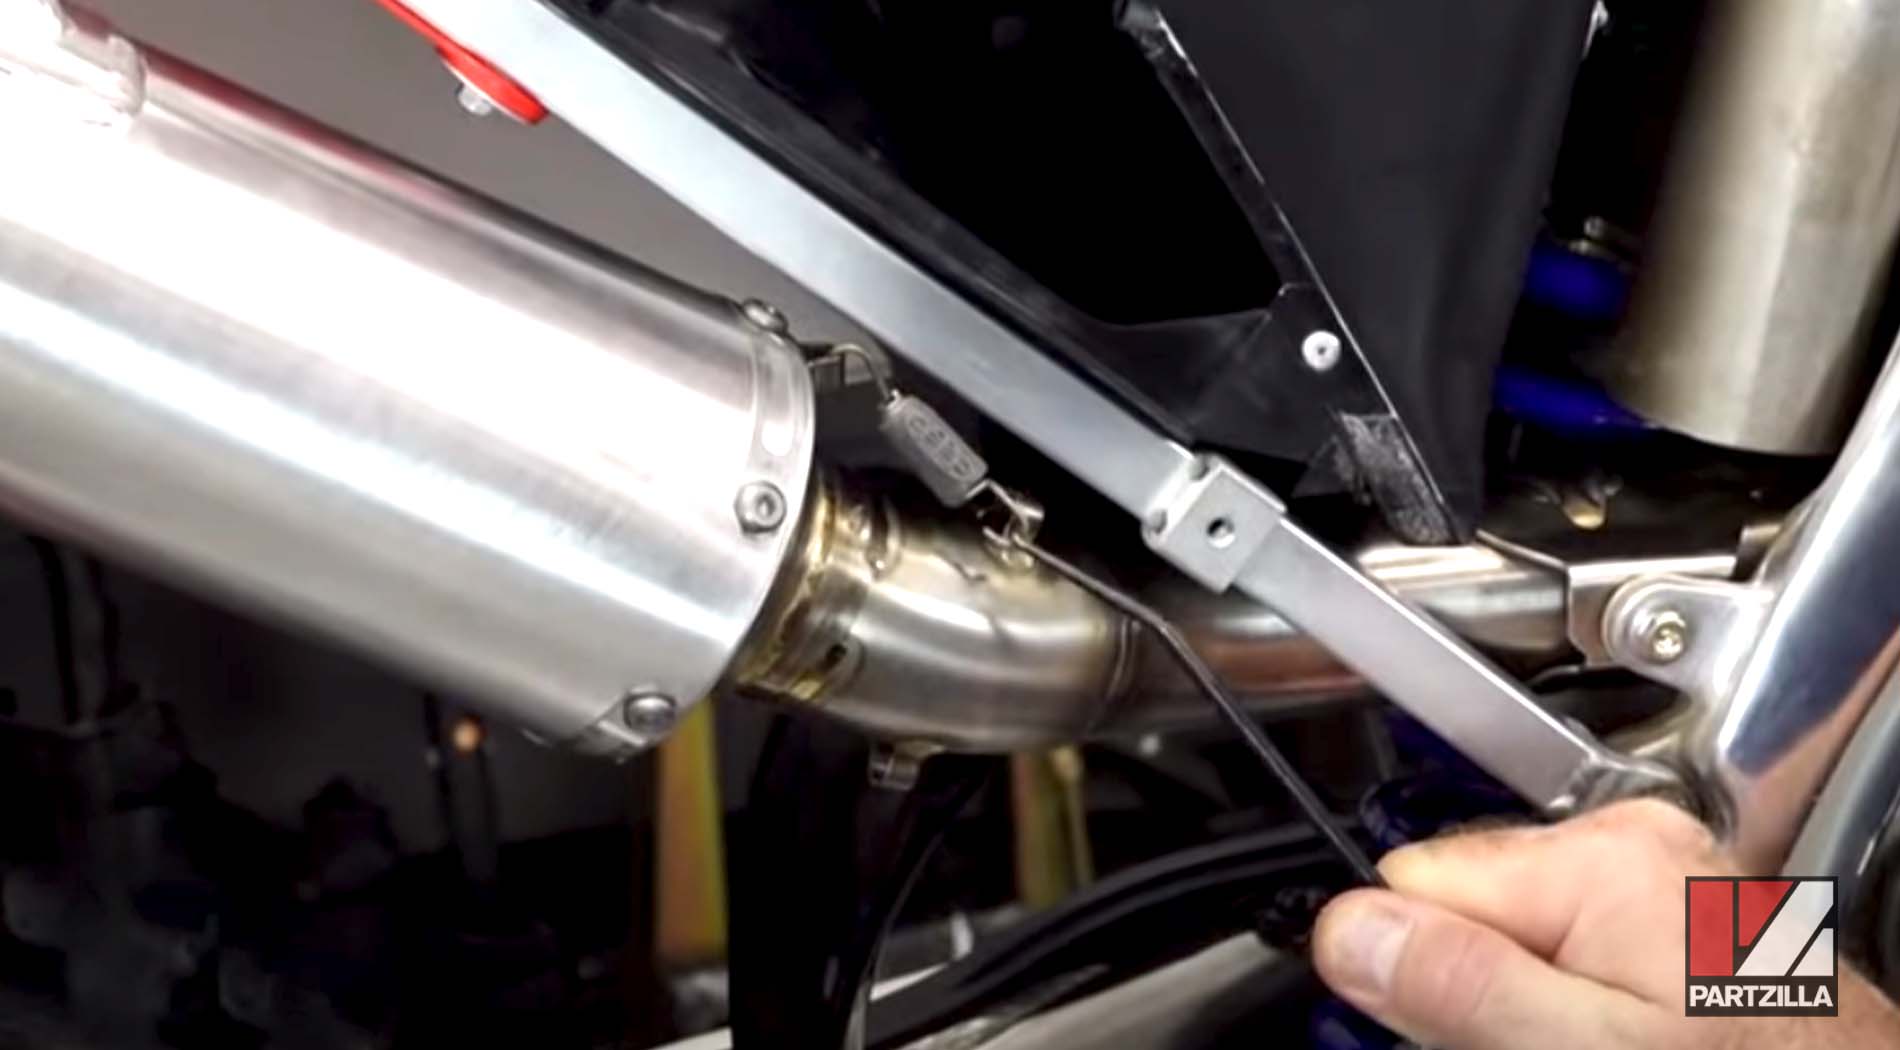 CRF450R motorcycle aftermarket exhaust installation